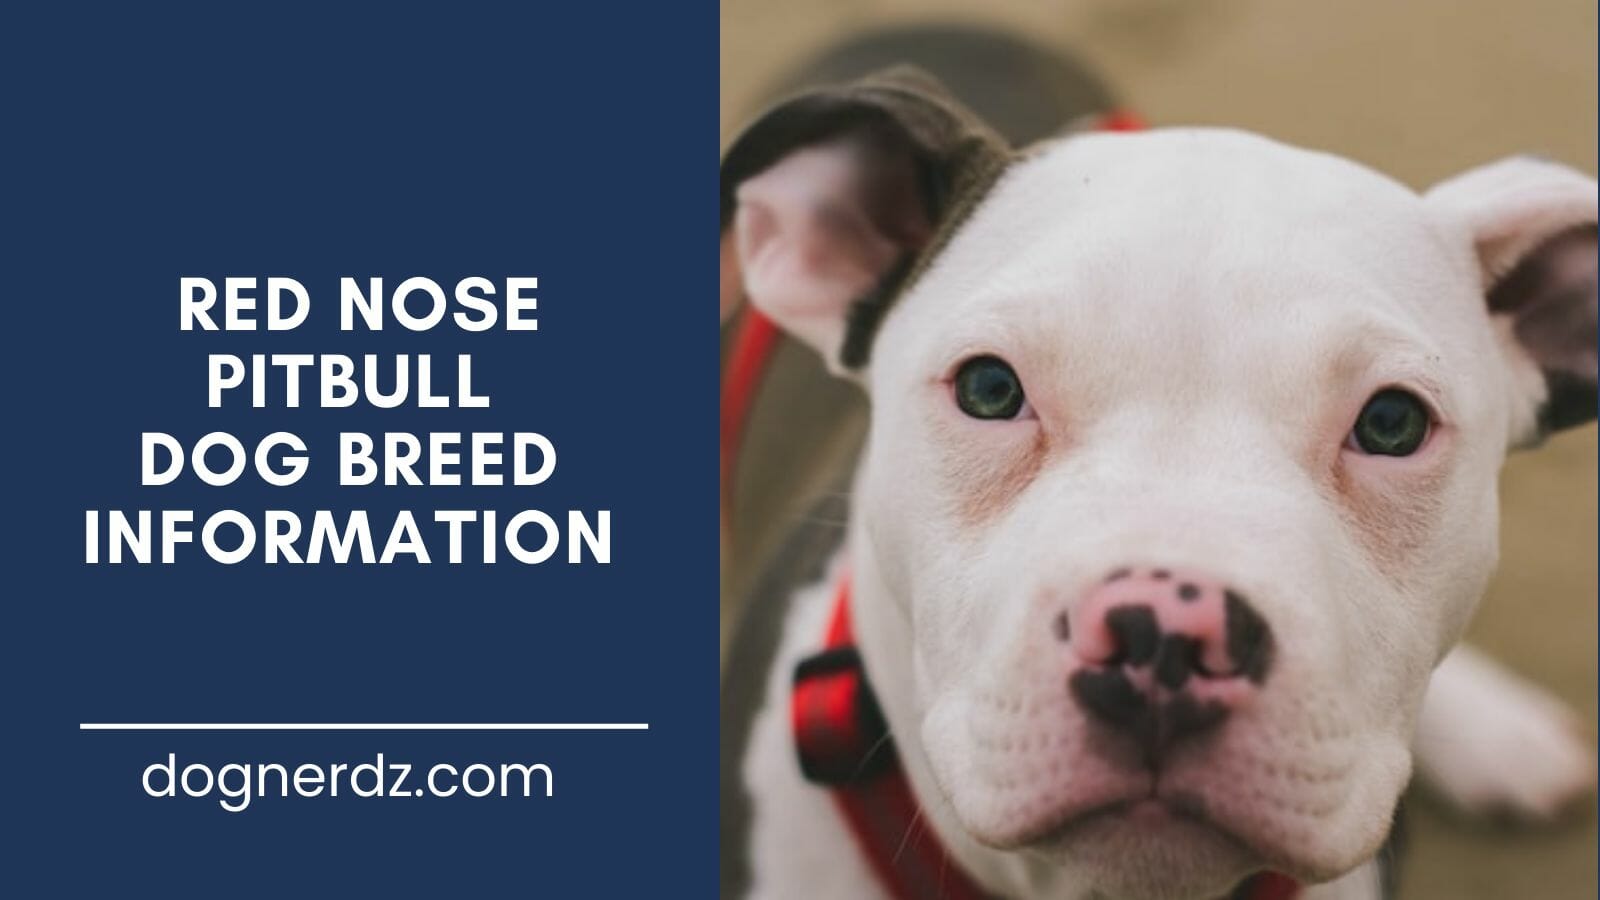 red nose pitbull dog breed information guide